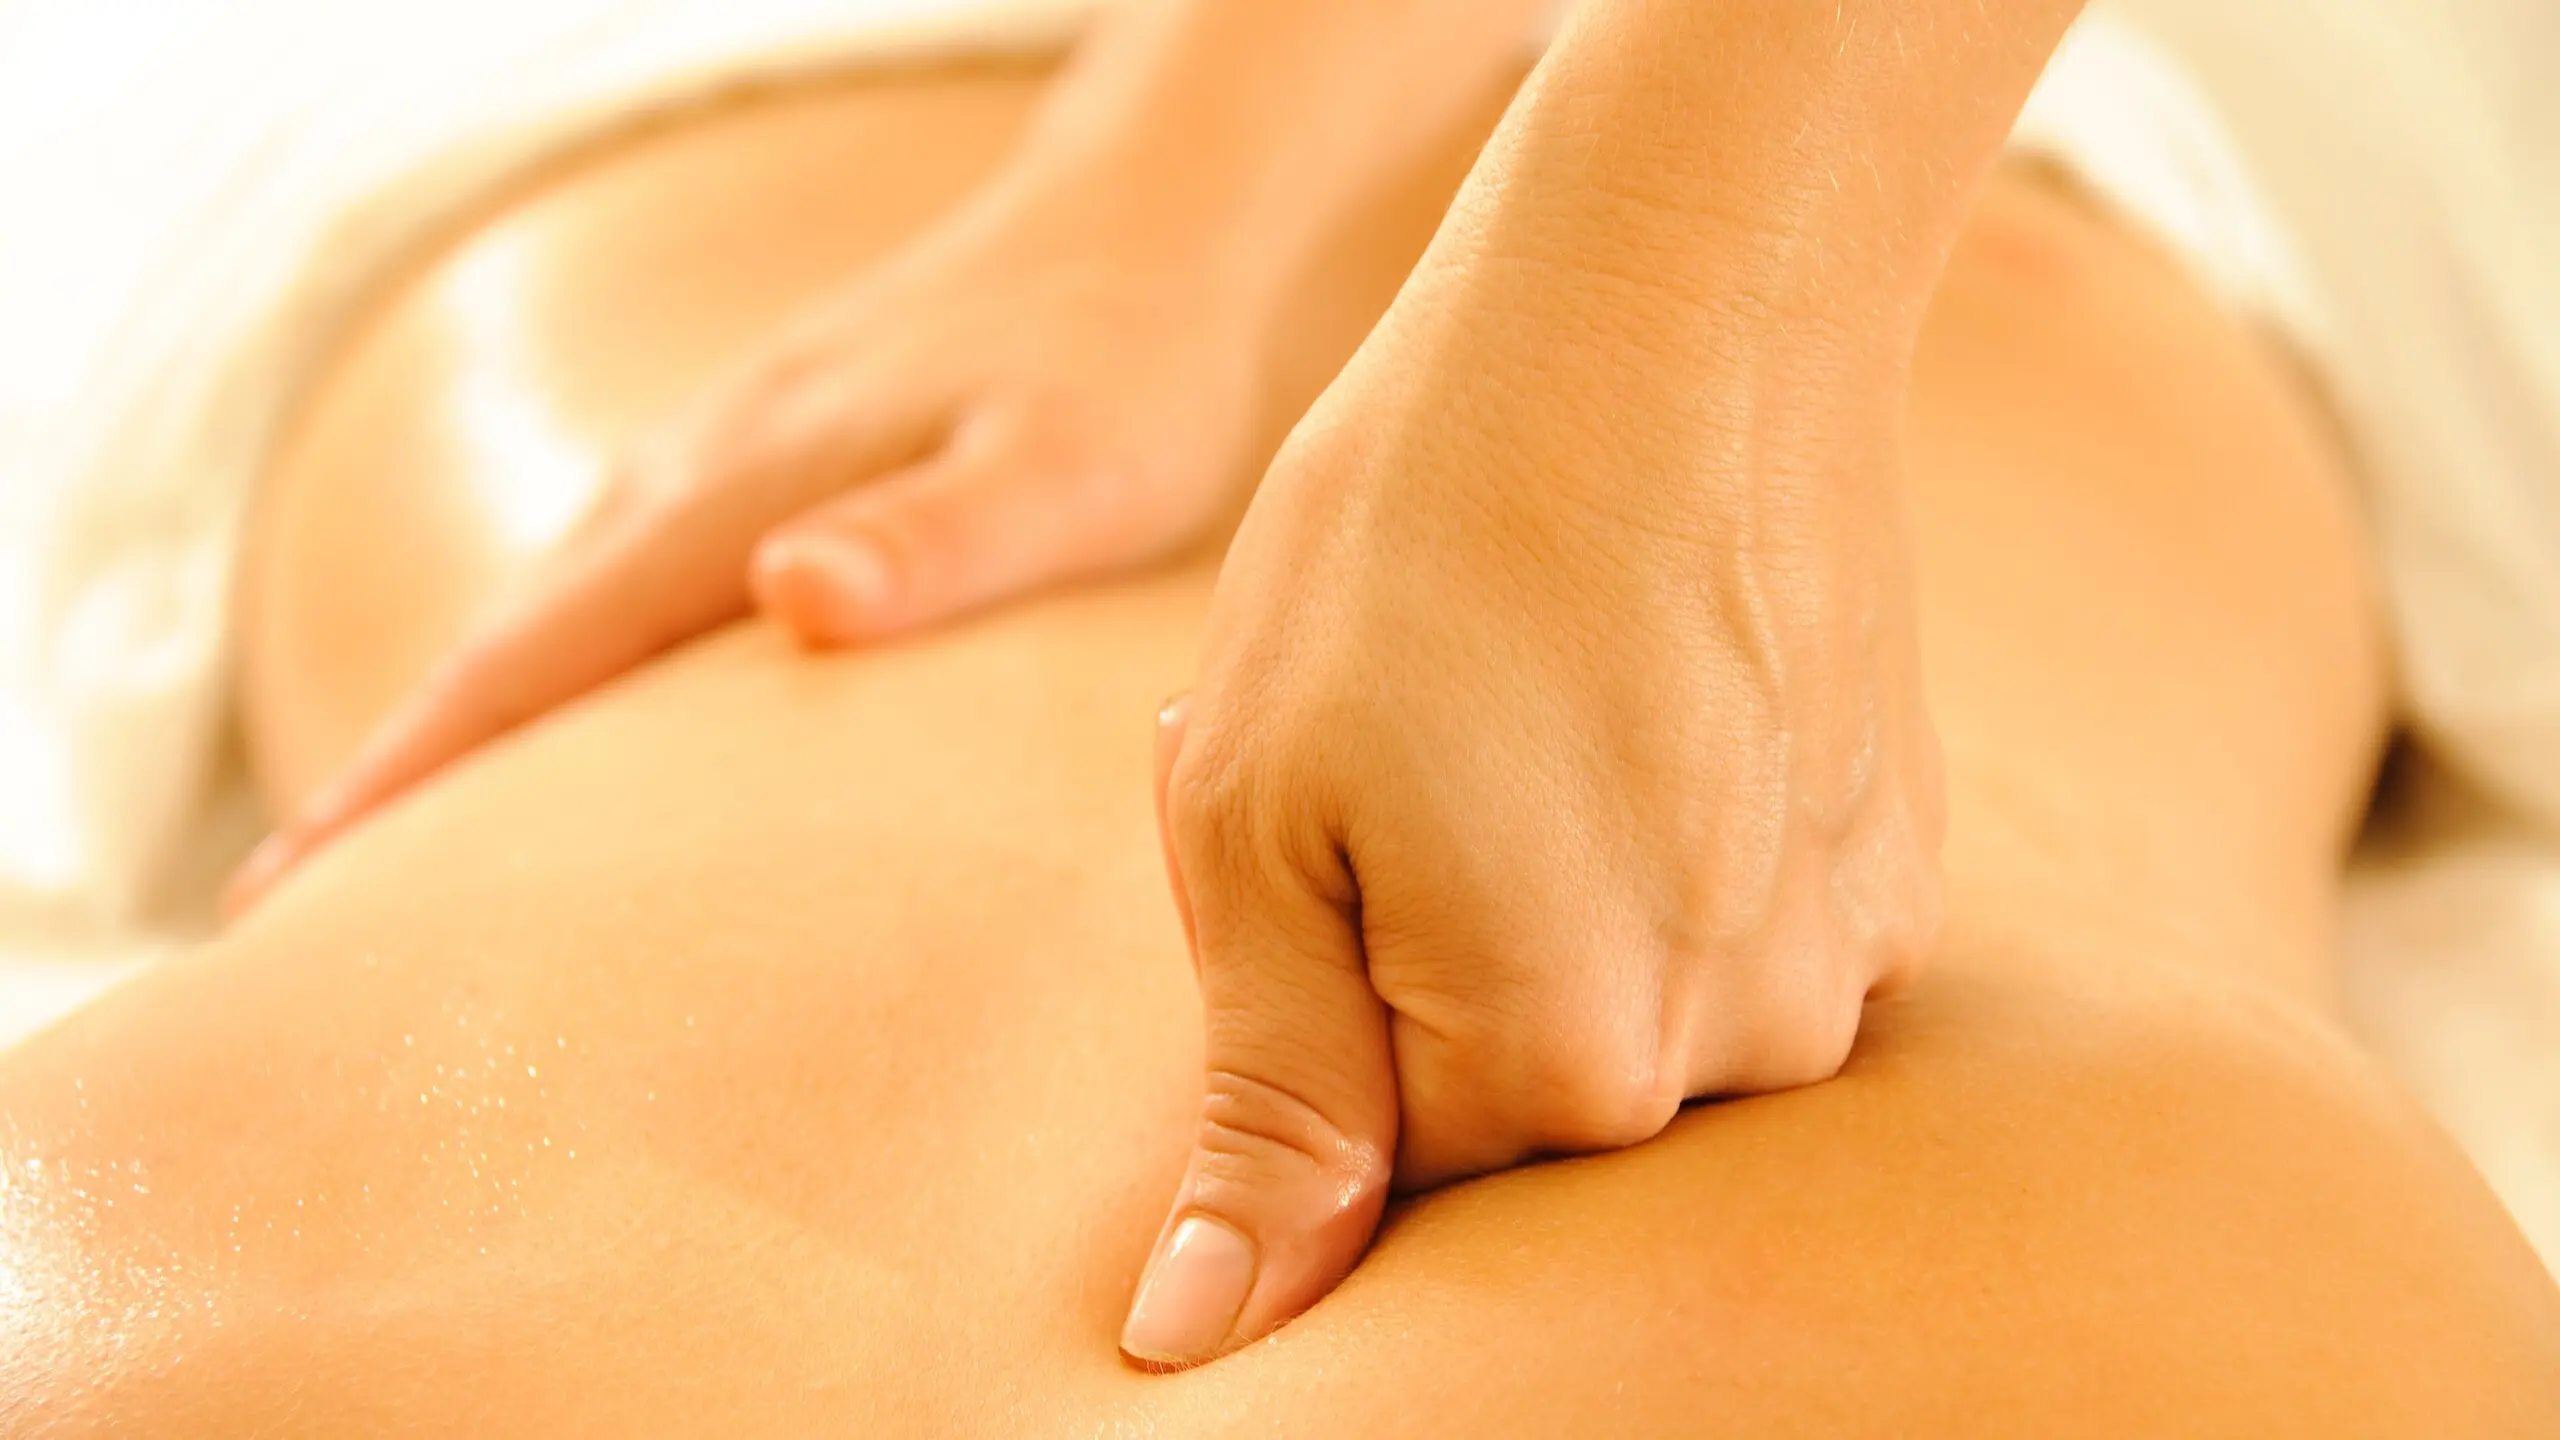 Woman receiving massage therapy treatment